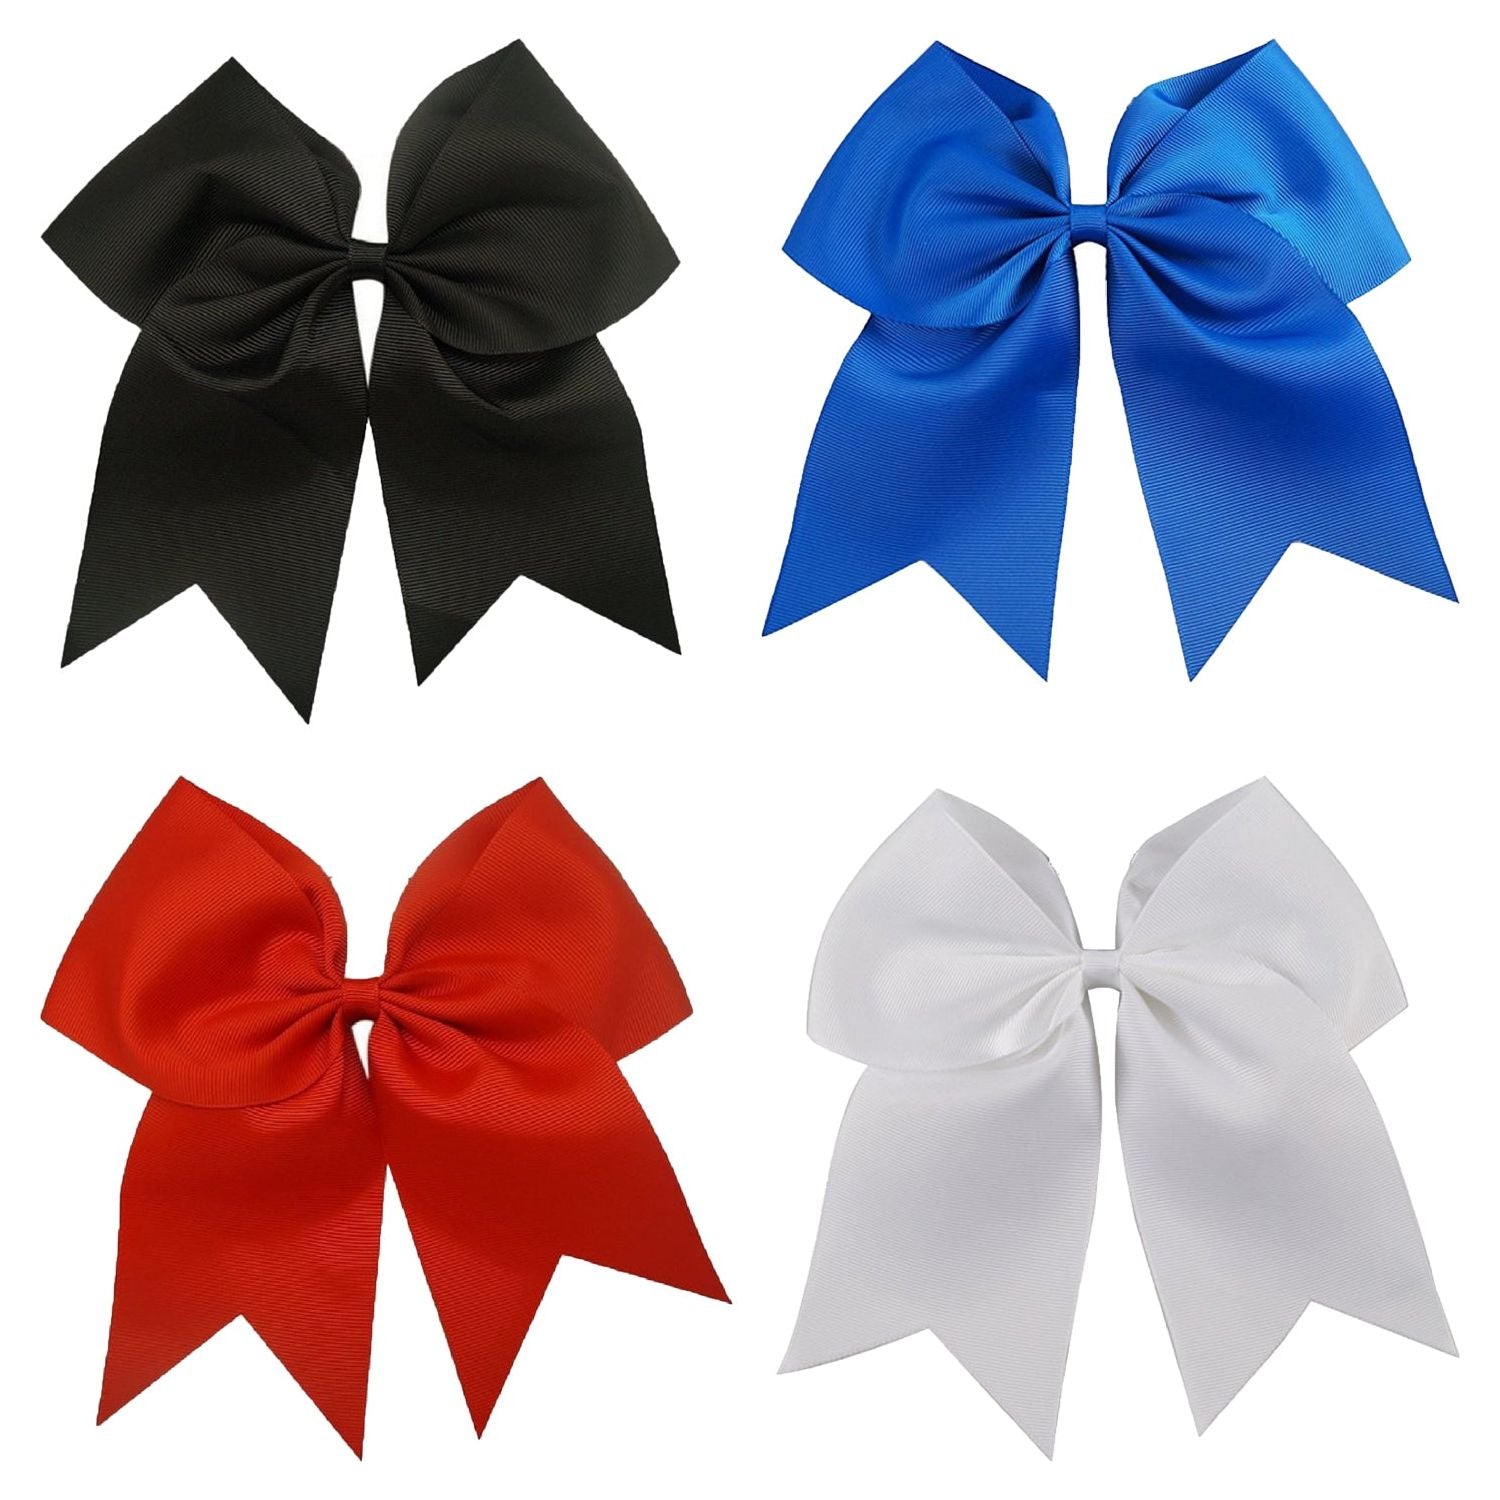  Cheer Bows Red Cheerleading Softball - Gifts for Girls and  Women Team Bow with Ponytail Holder Complete your Cheerleader Outfit  Uniform Strong Hair Ties Bands Elastics by Kenz Laurenz (1) 